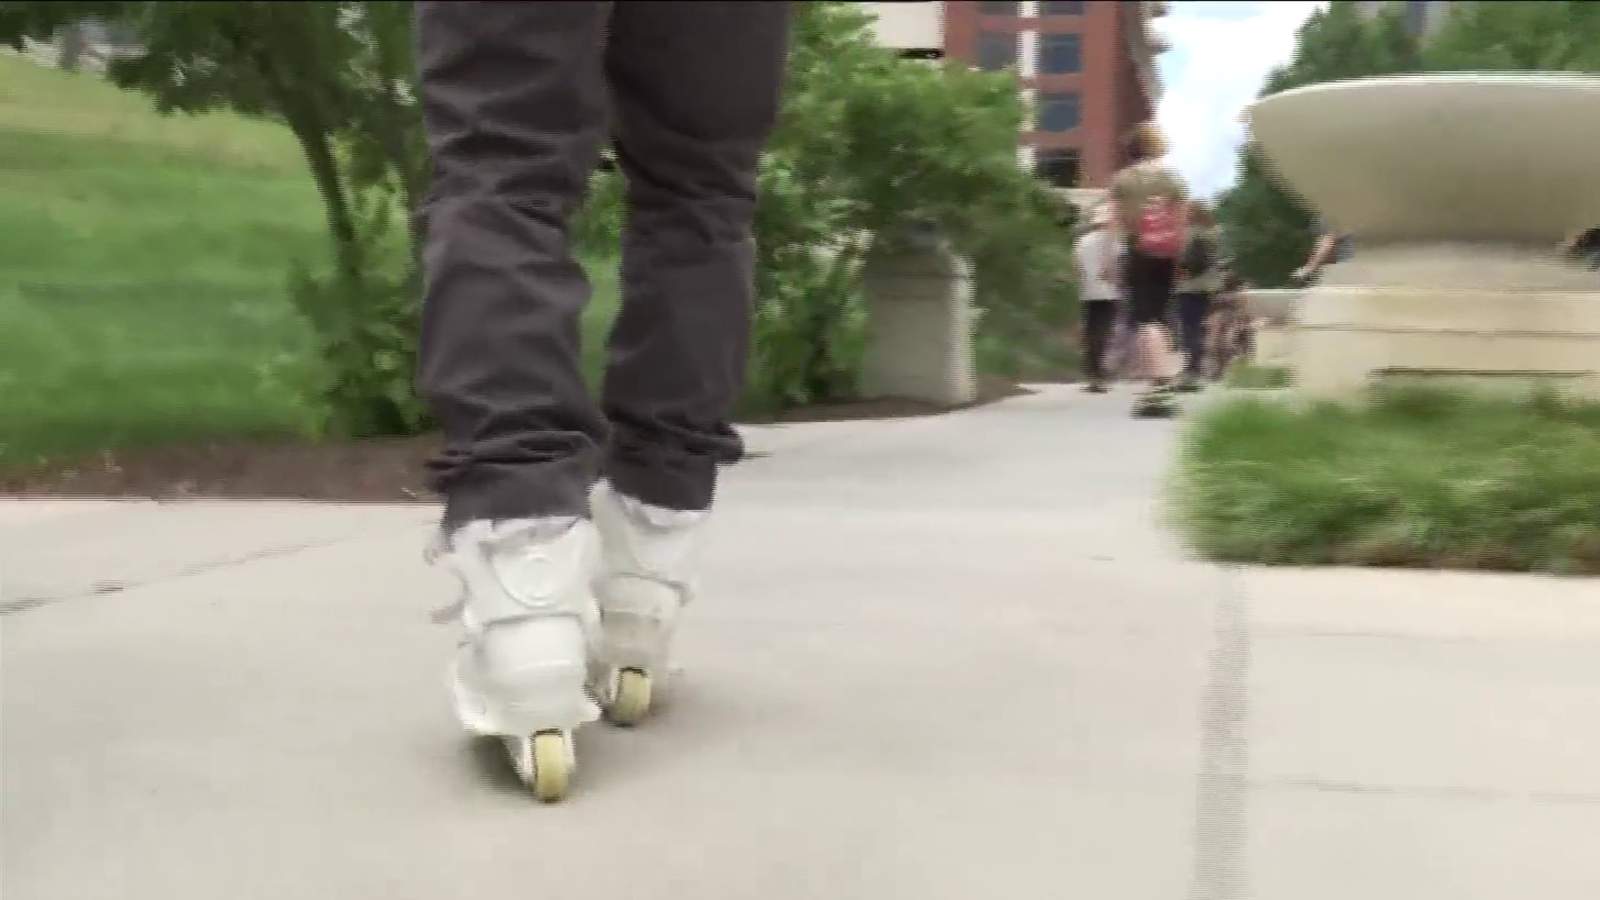 ‘We need everybody on board’: Skateboarders, roller skaters protest for racial equality